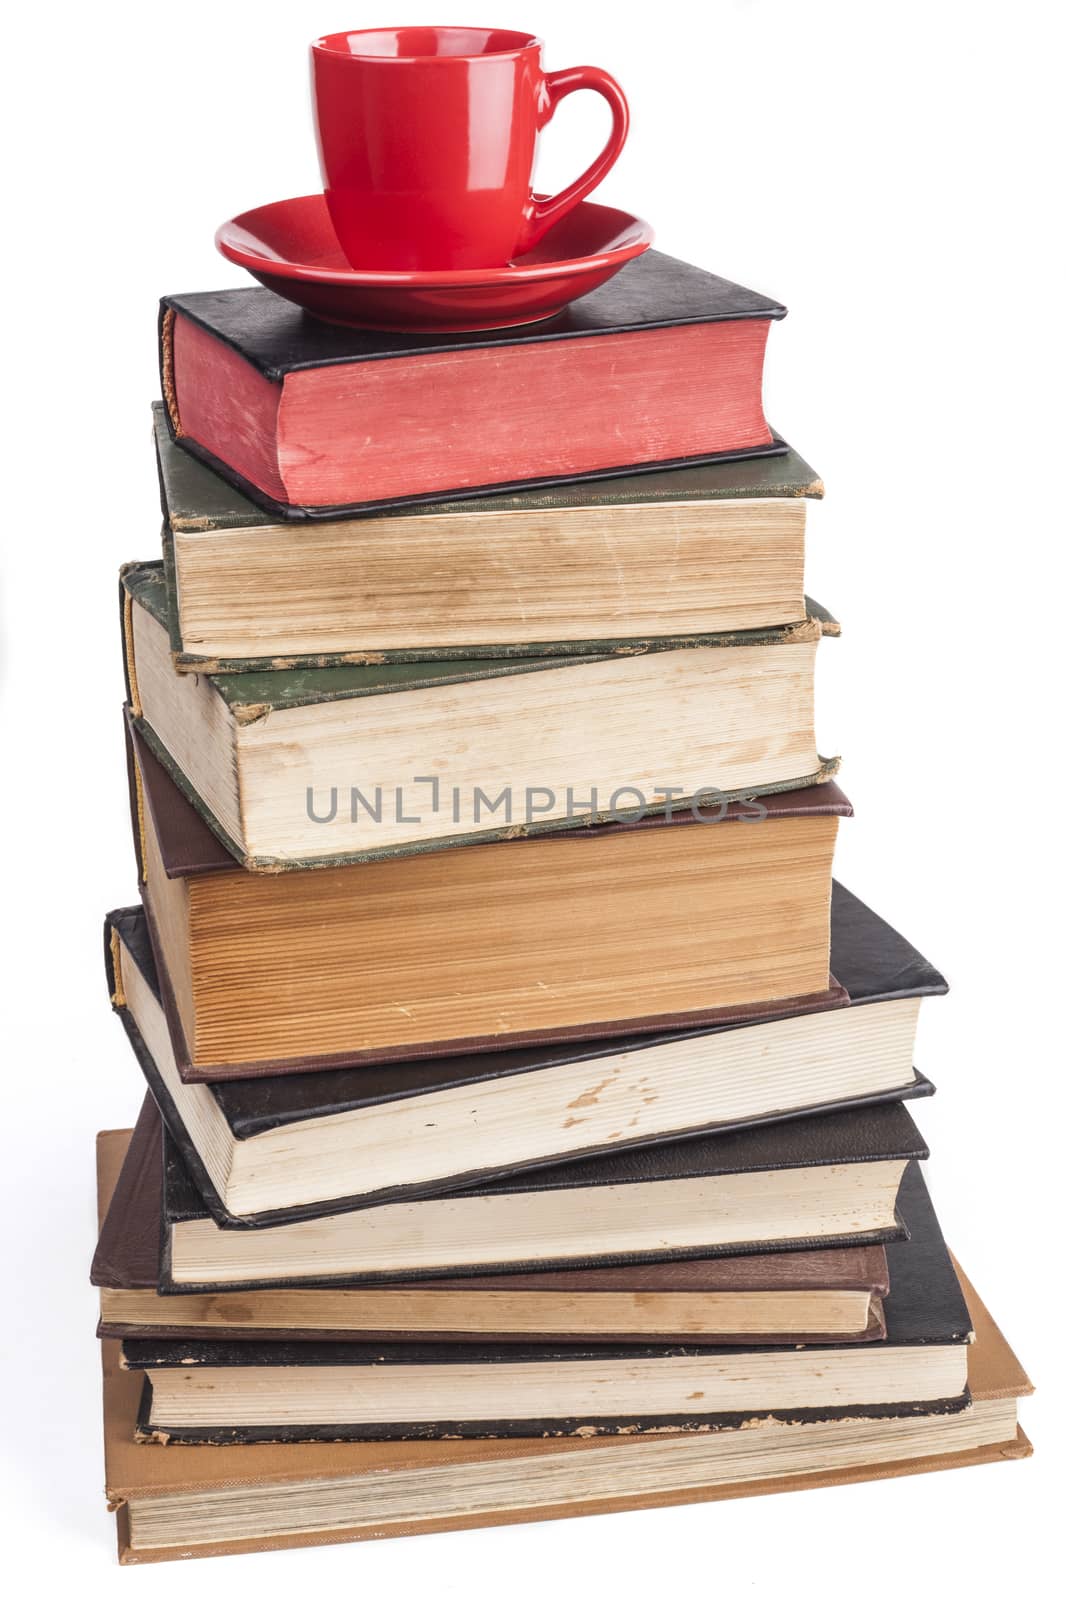 Old Books  and red coffee mug isolated on white background